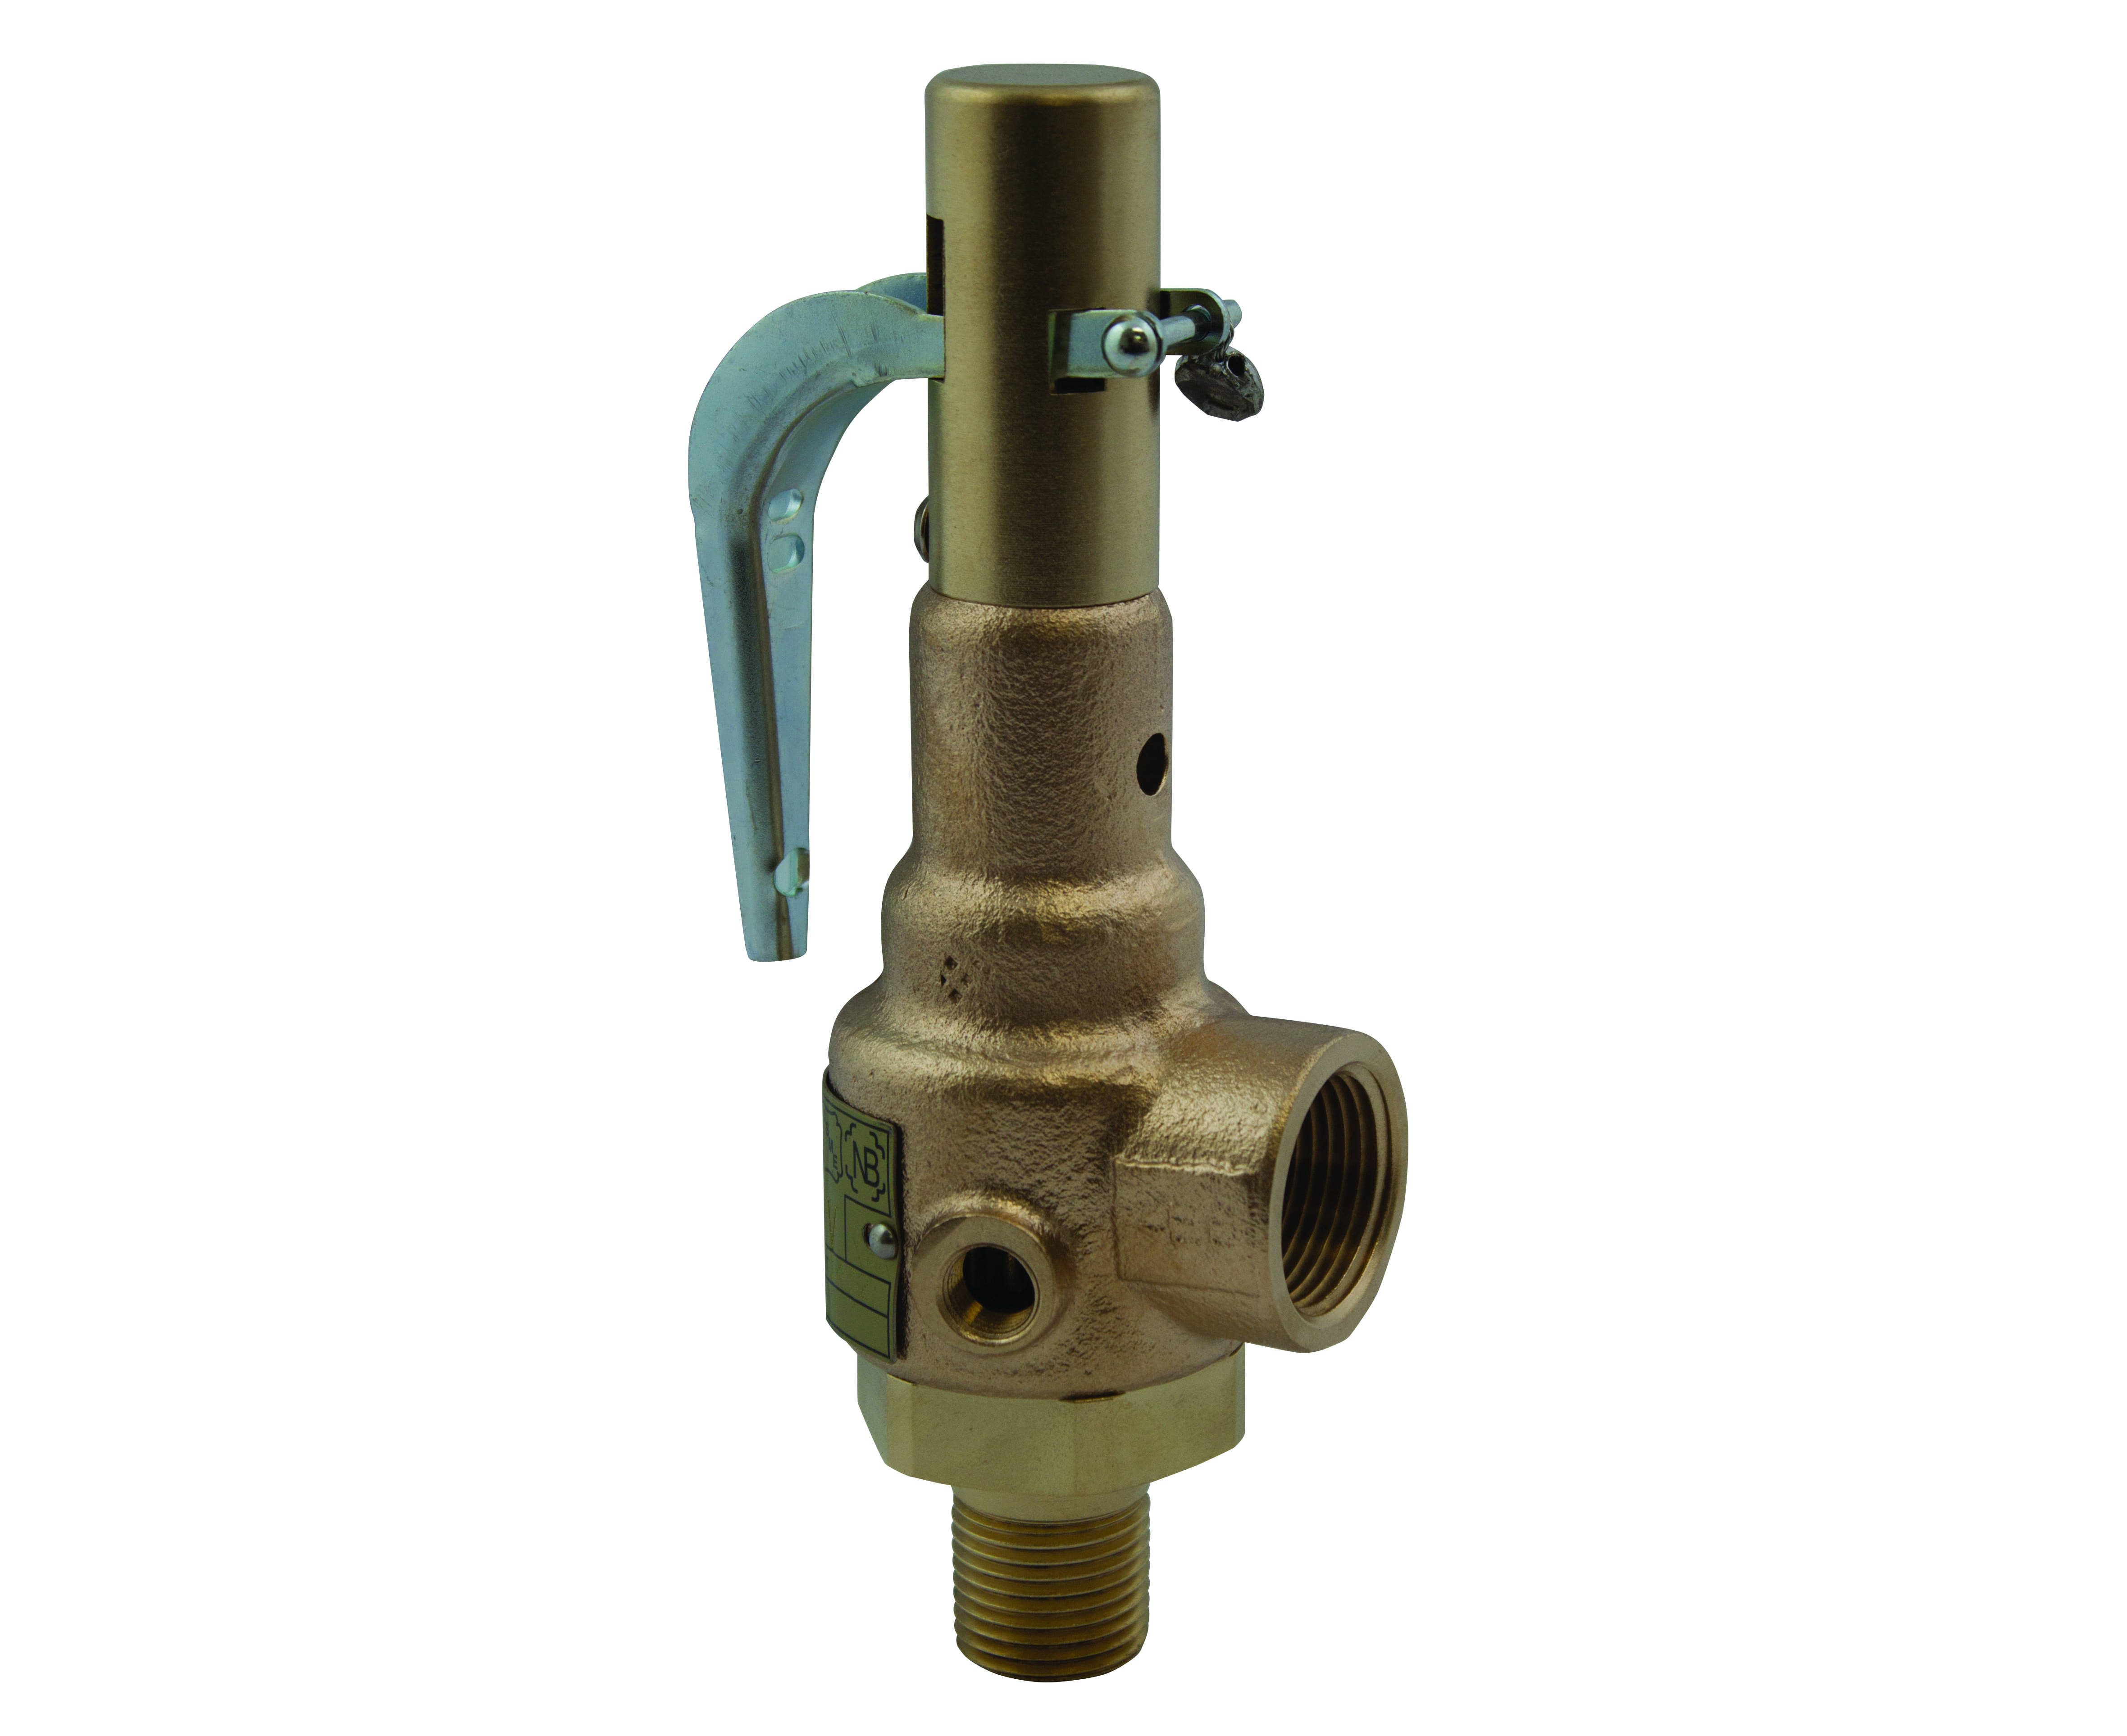 Preview image for Apollo ASME Sec I Steam Bronze Safety Relief Valves with Brass Trim, Teflon Seat, Performance Test Reports Included, 1-1/2" (MNPT x FNPT)